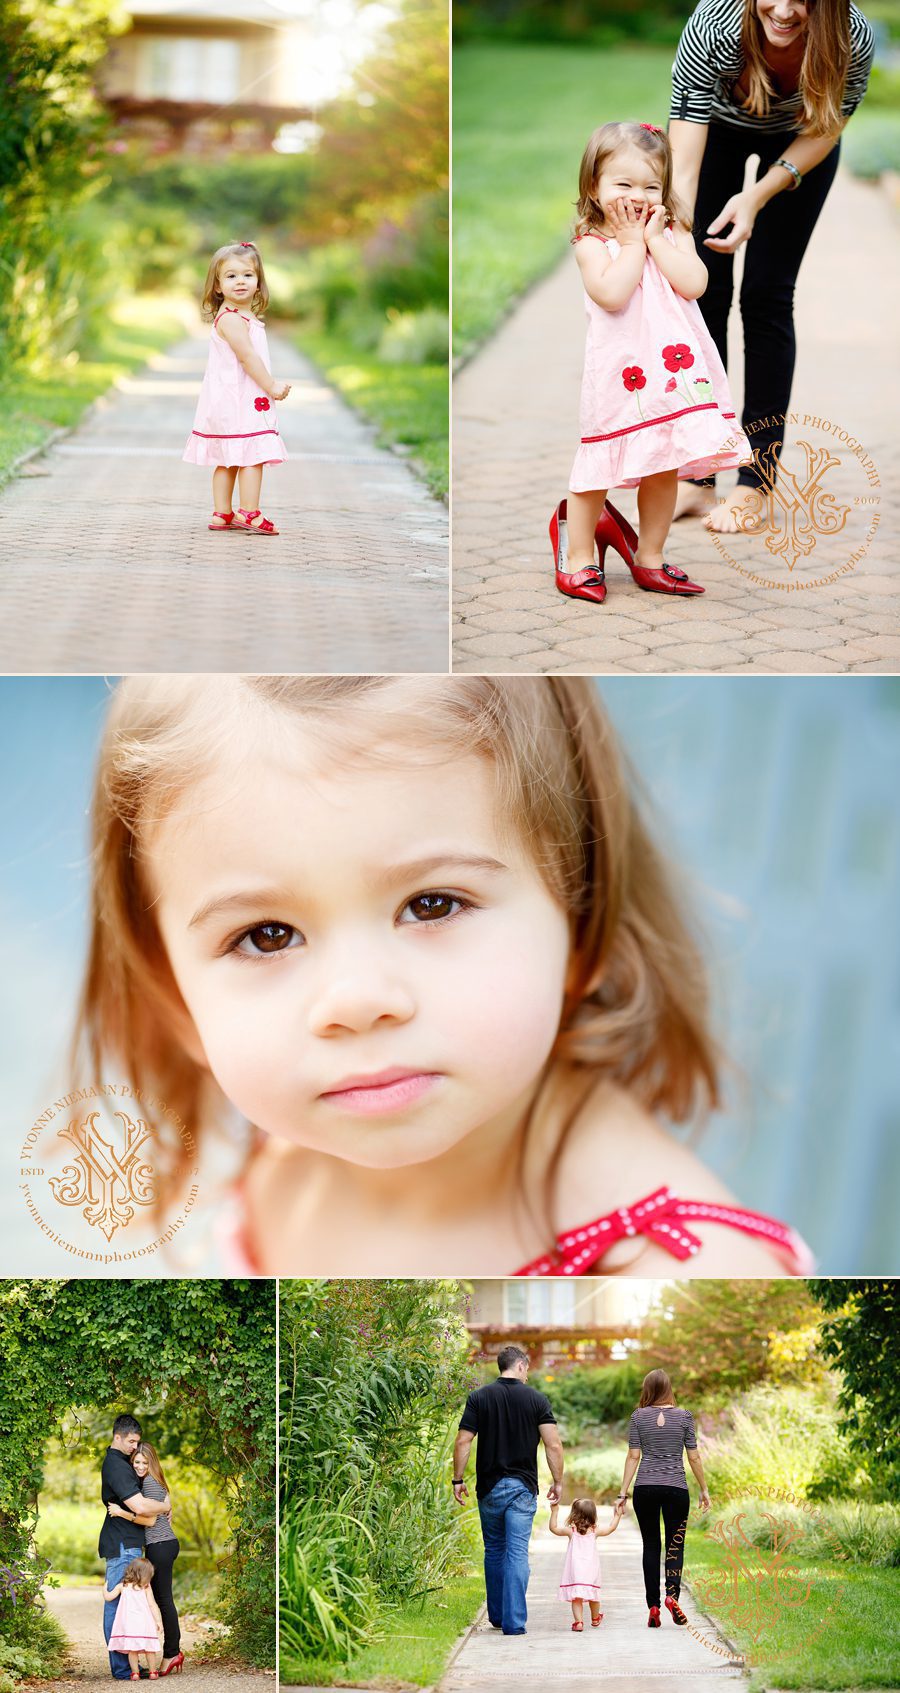 Sweet portraits of a two year old girl in St. Charles, MO taken by Yvonne Niemann Photography